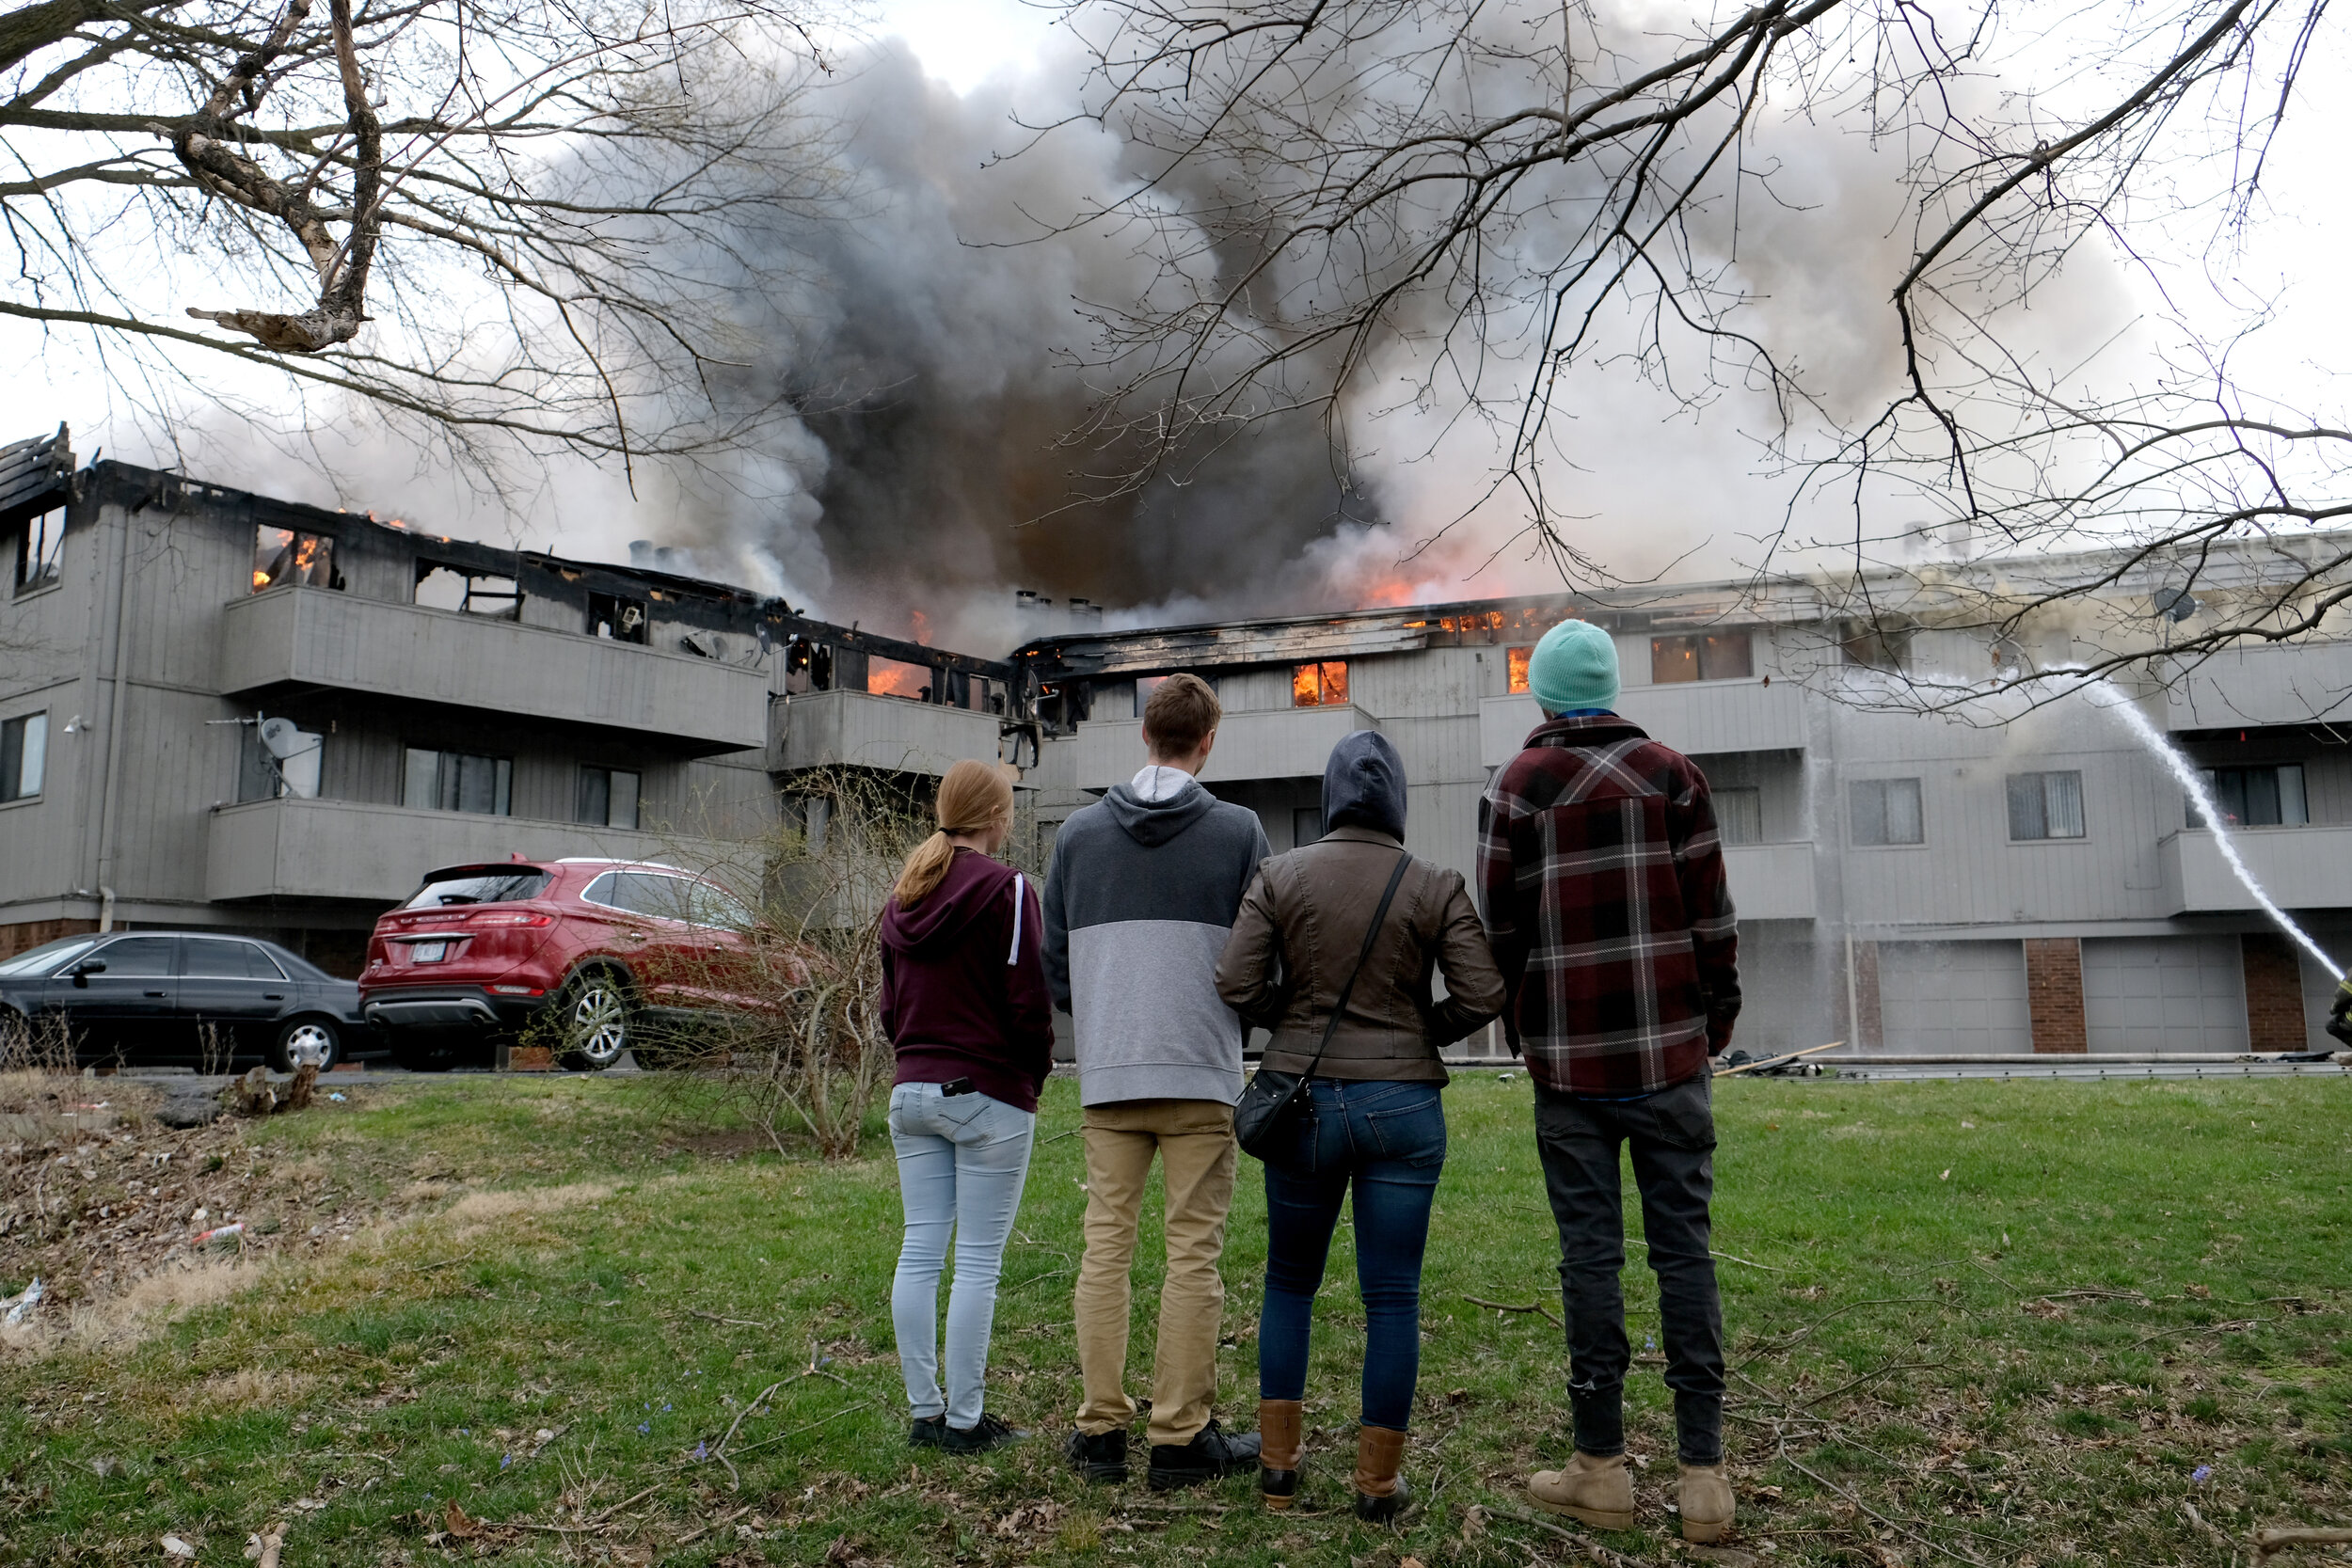  Bystanders watch as the Toledo Fire Department fights an apartment fire at 5900 block Cresthaven Lane in Toledo. © Toledo Blade | March 2021 